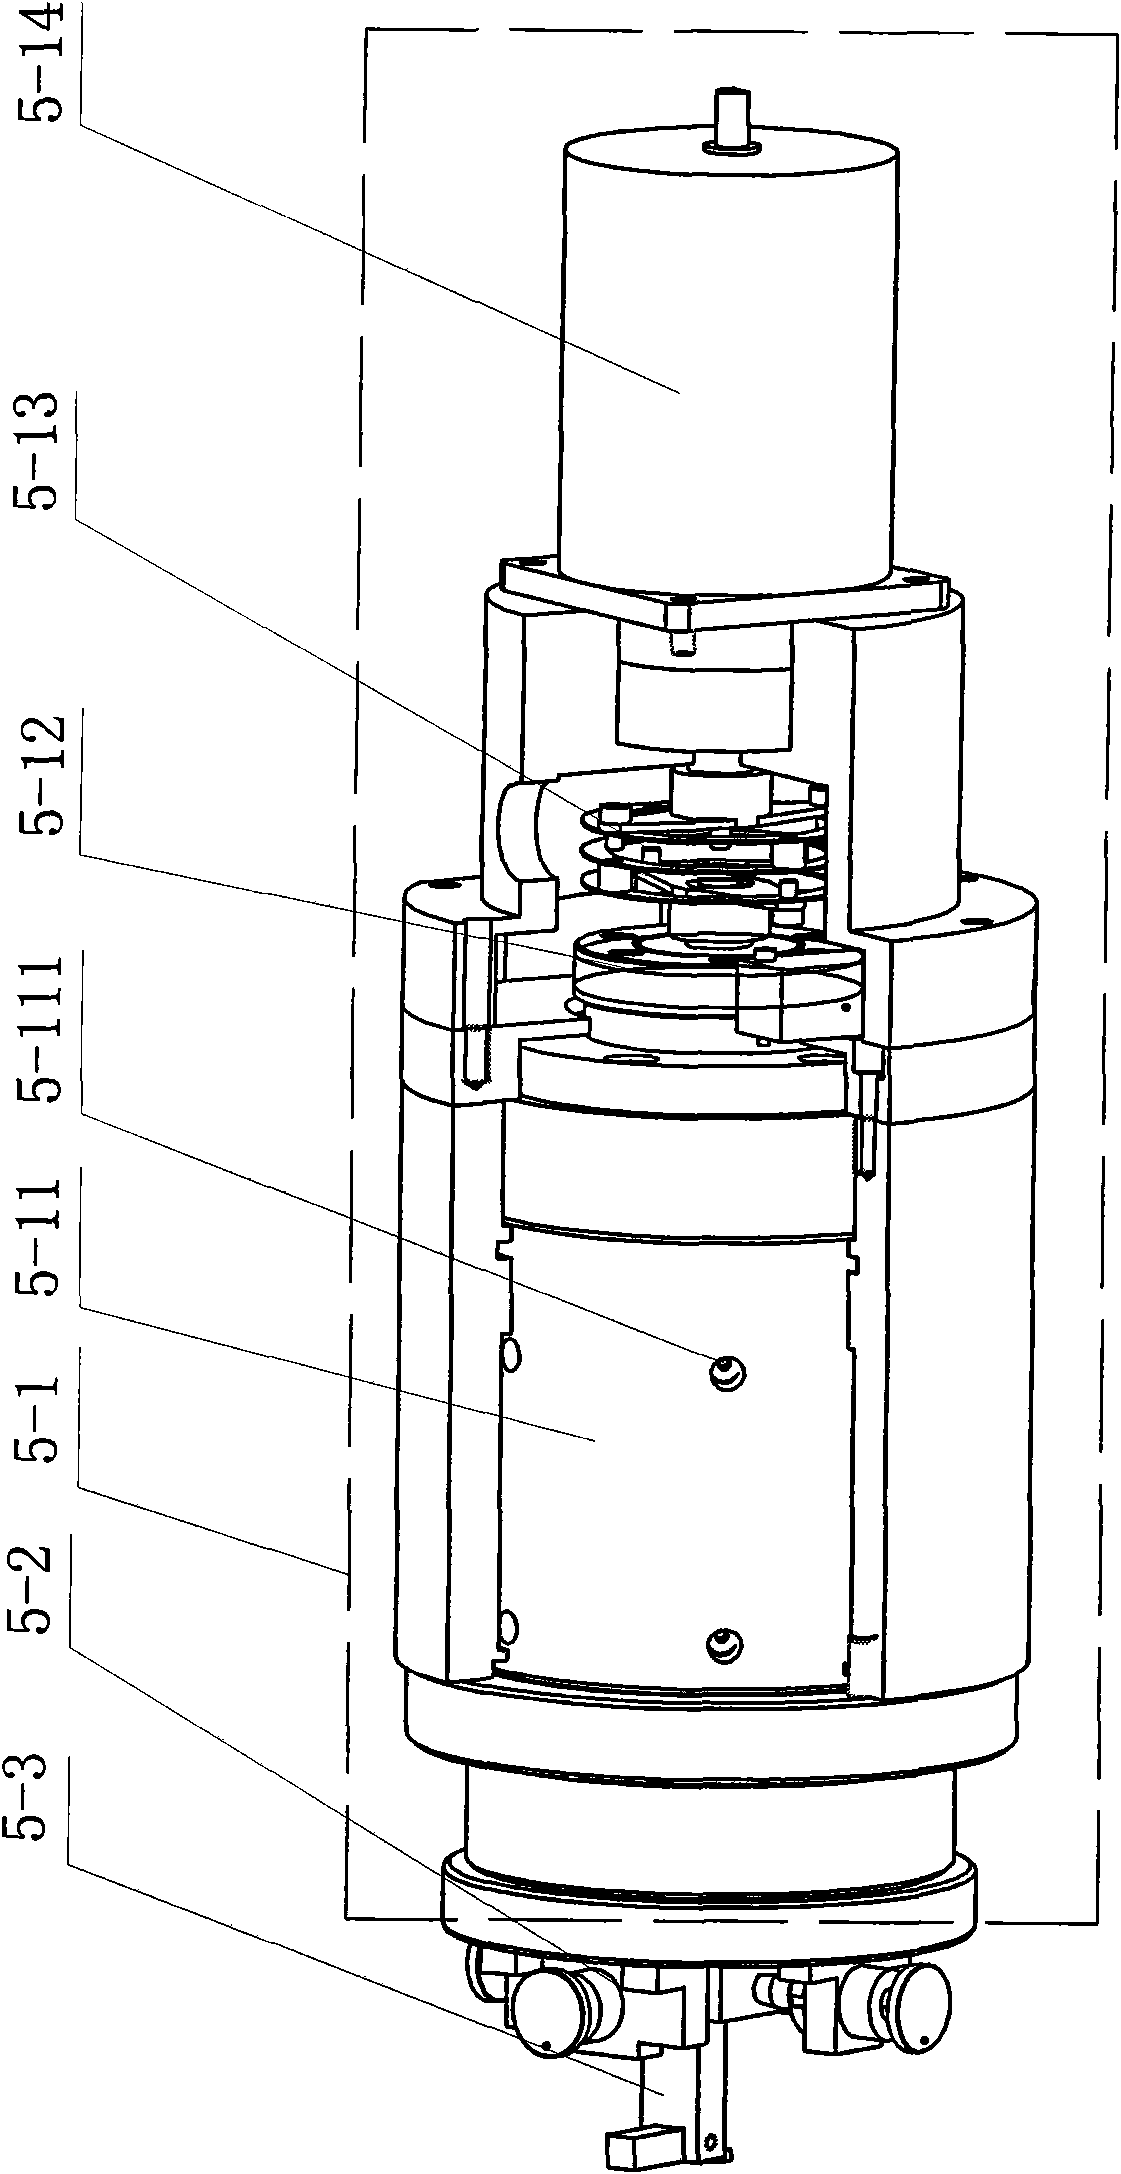 Device for detecting roundness of arc of tool tip of diamond tool with arc edge